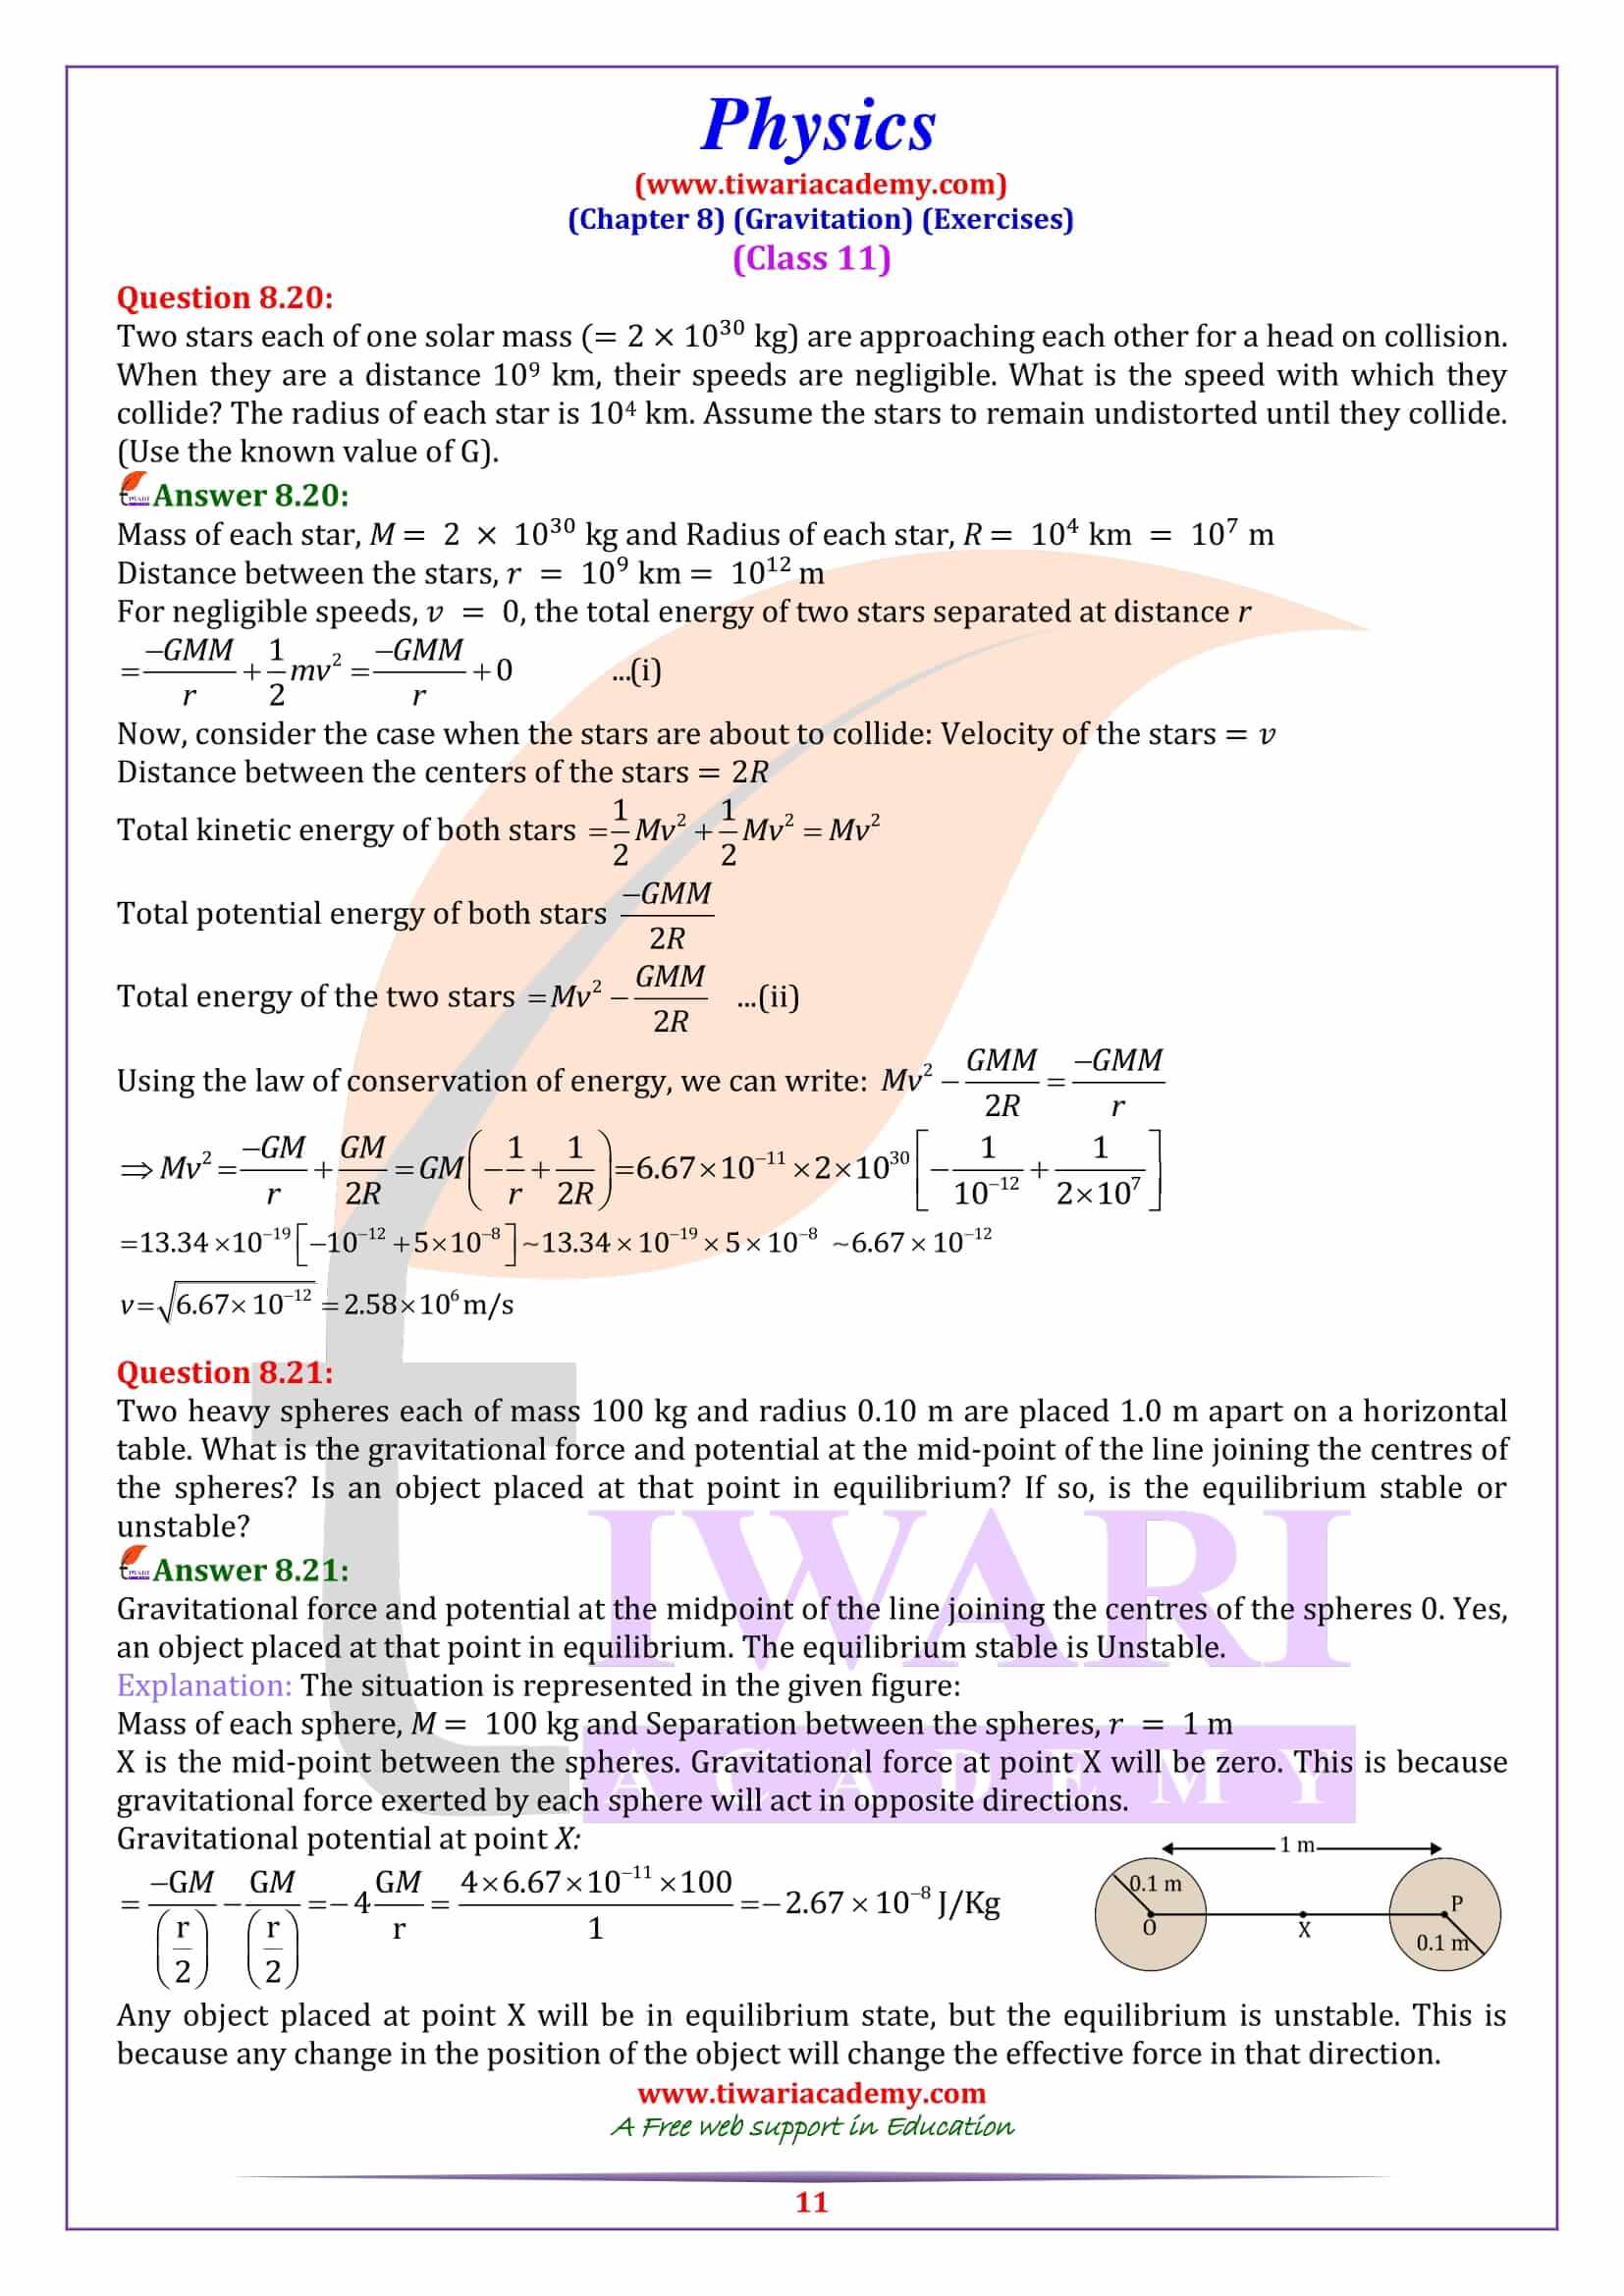 Class 11 Physics Chapter 8 end exercise solutions